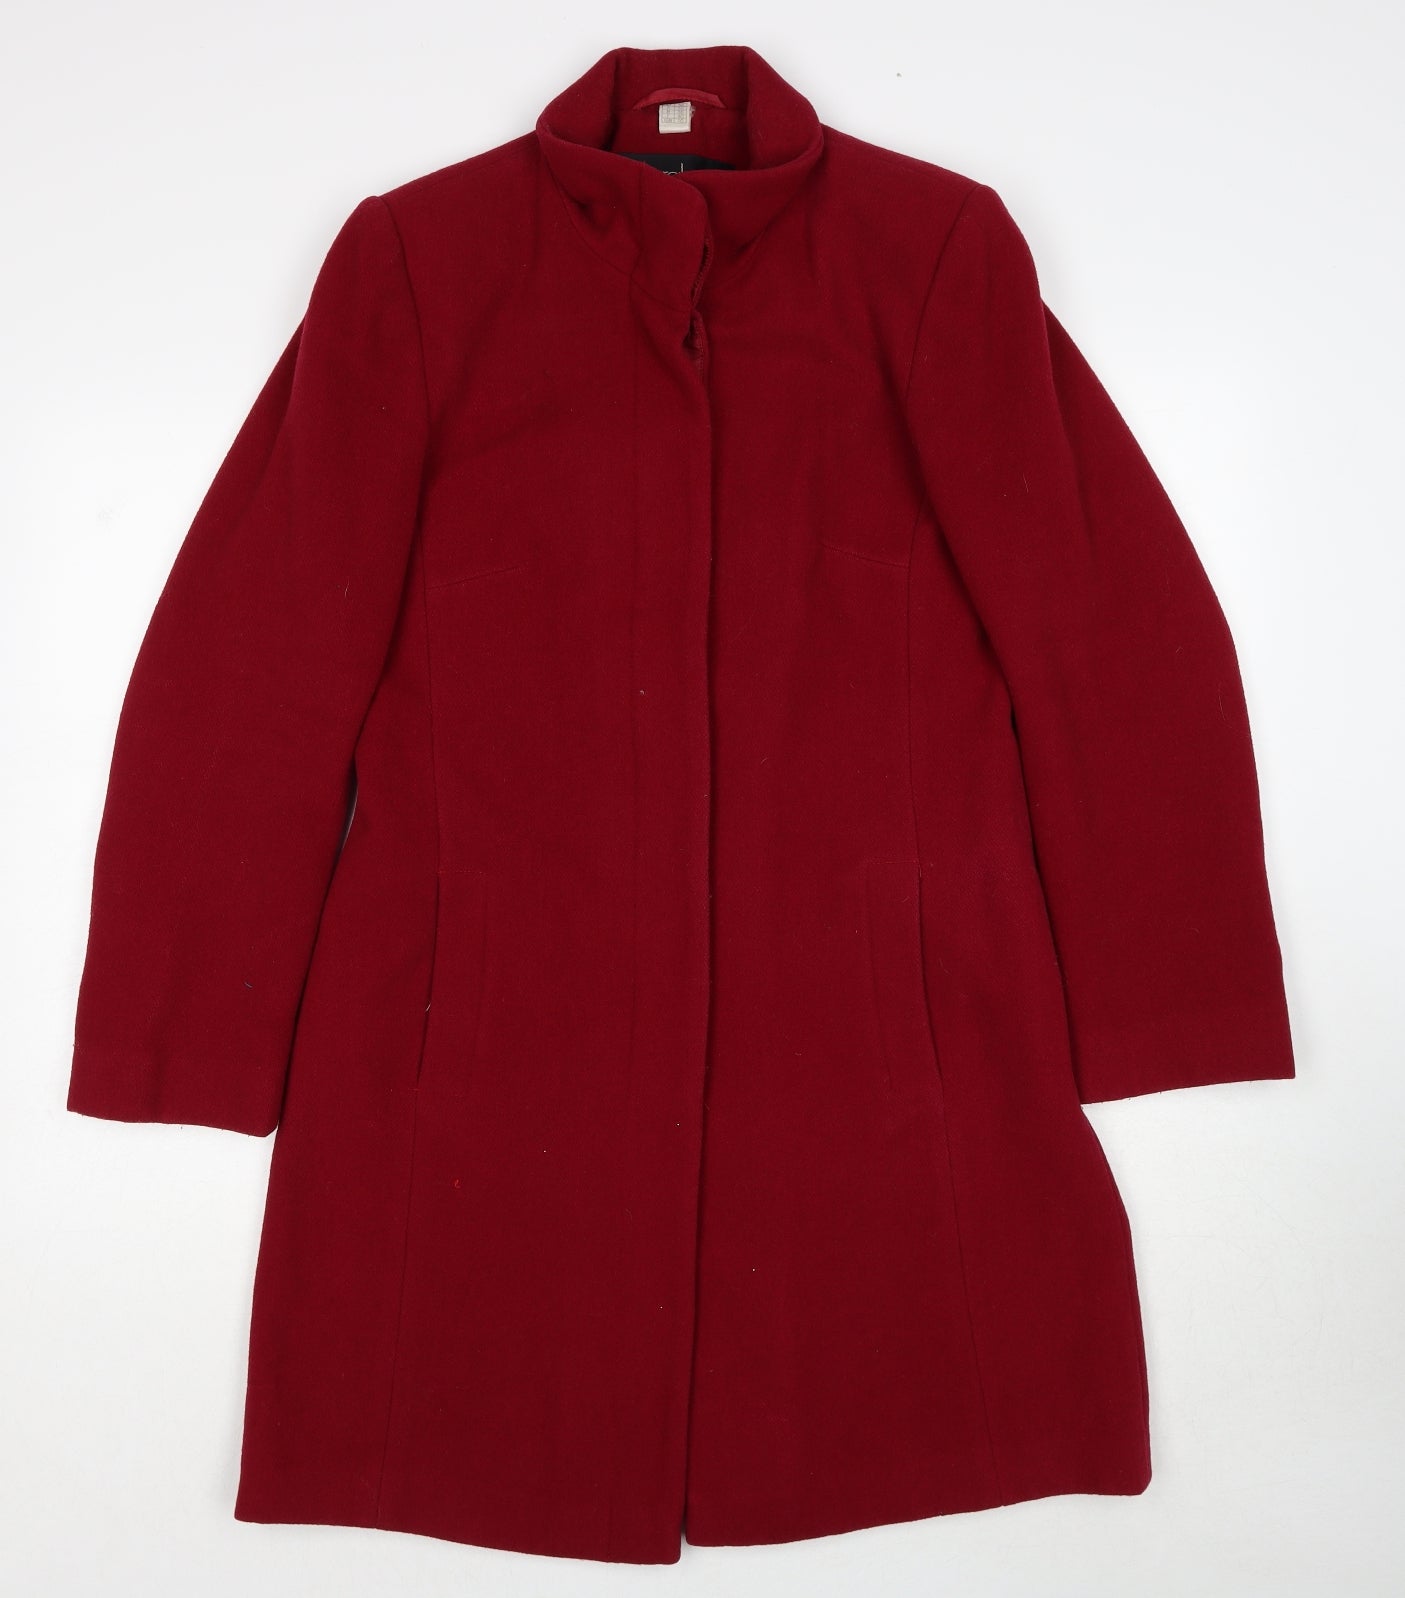 Berghaus Womens Red Overcoat Coat Size 10 Button